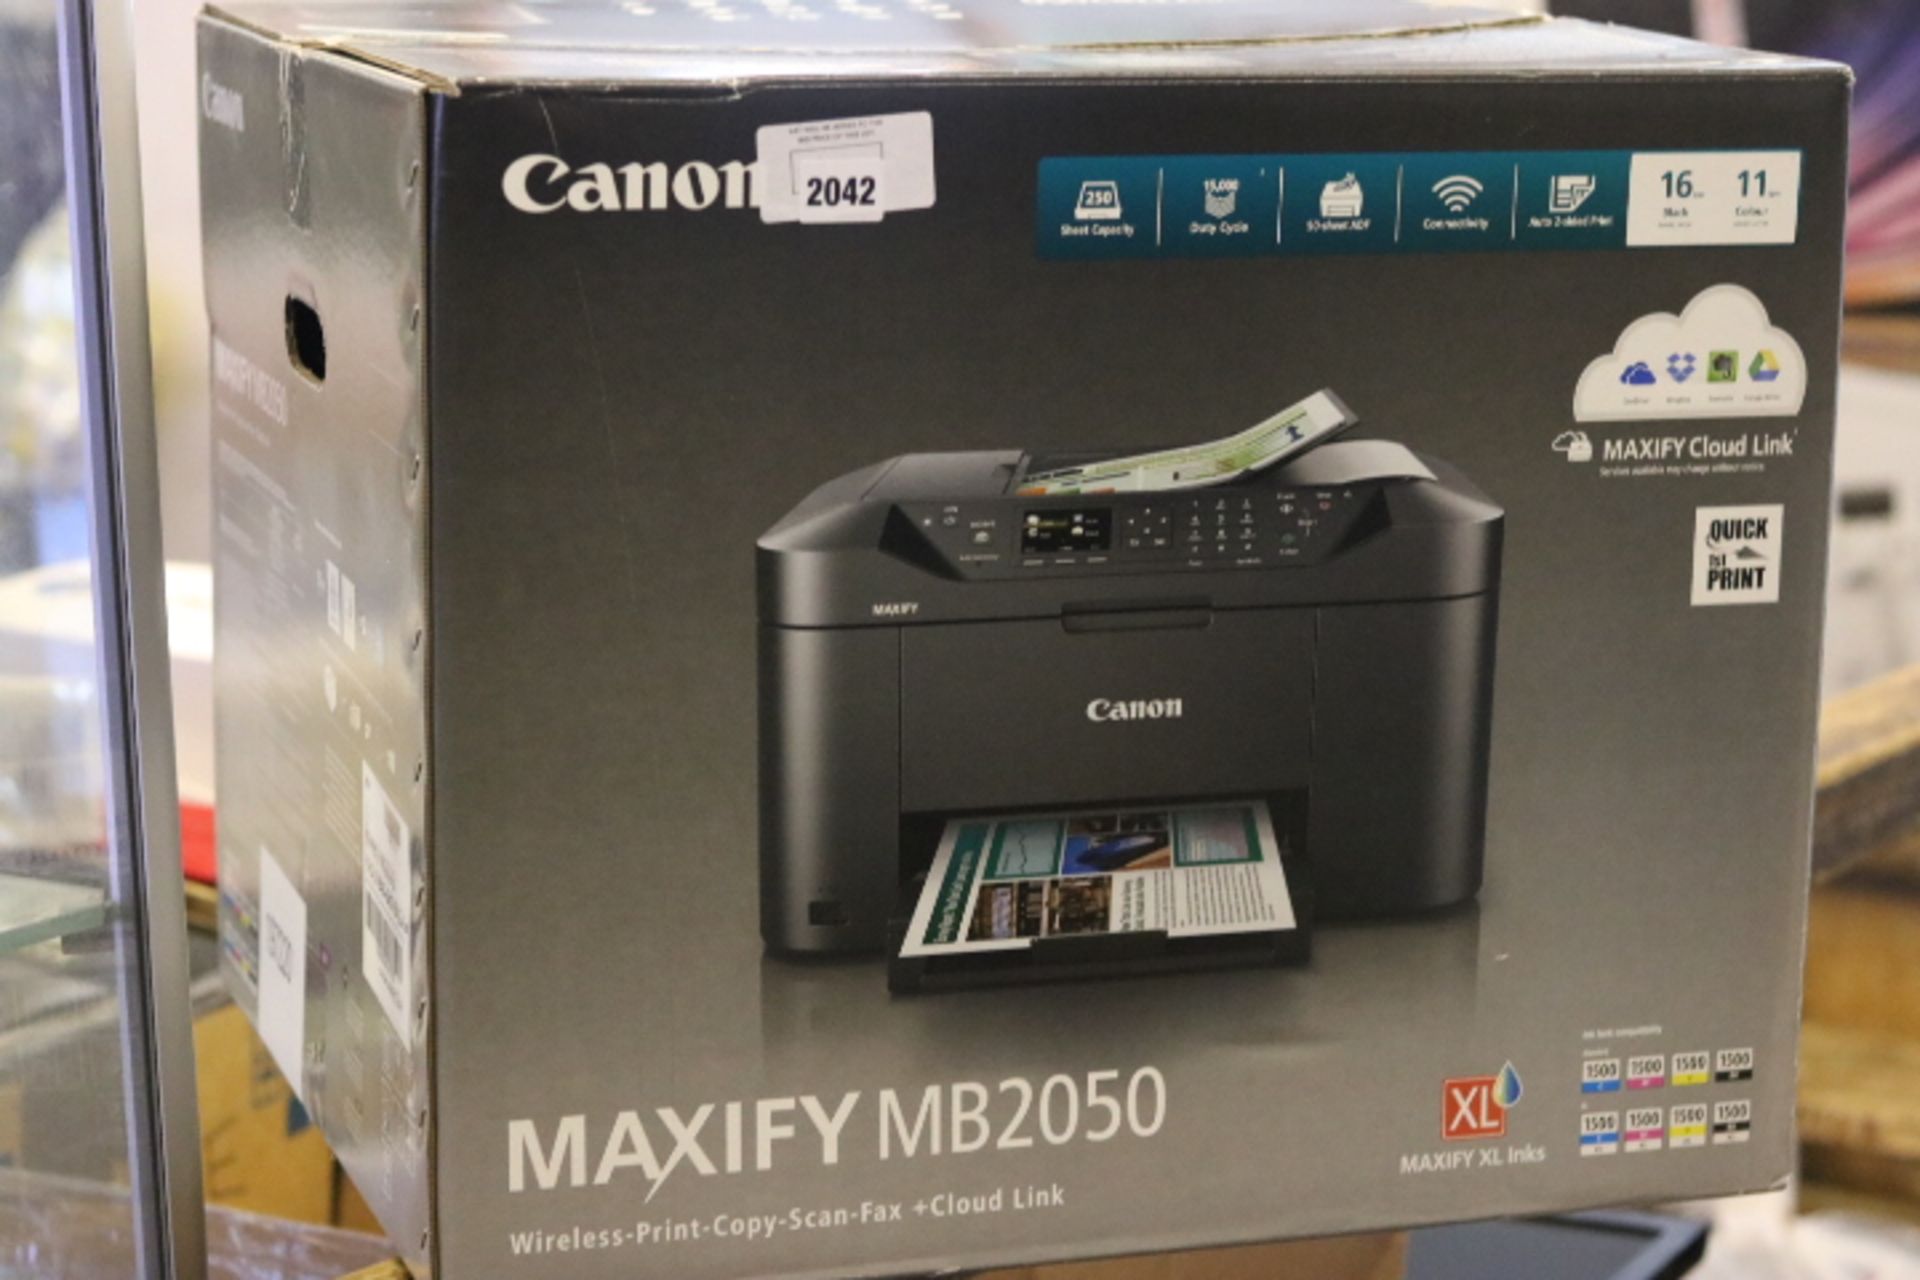 Canon maxify MB2050 wireless all in one printer in the box